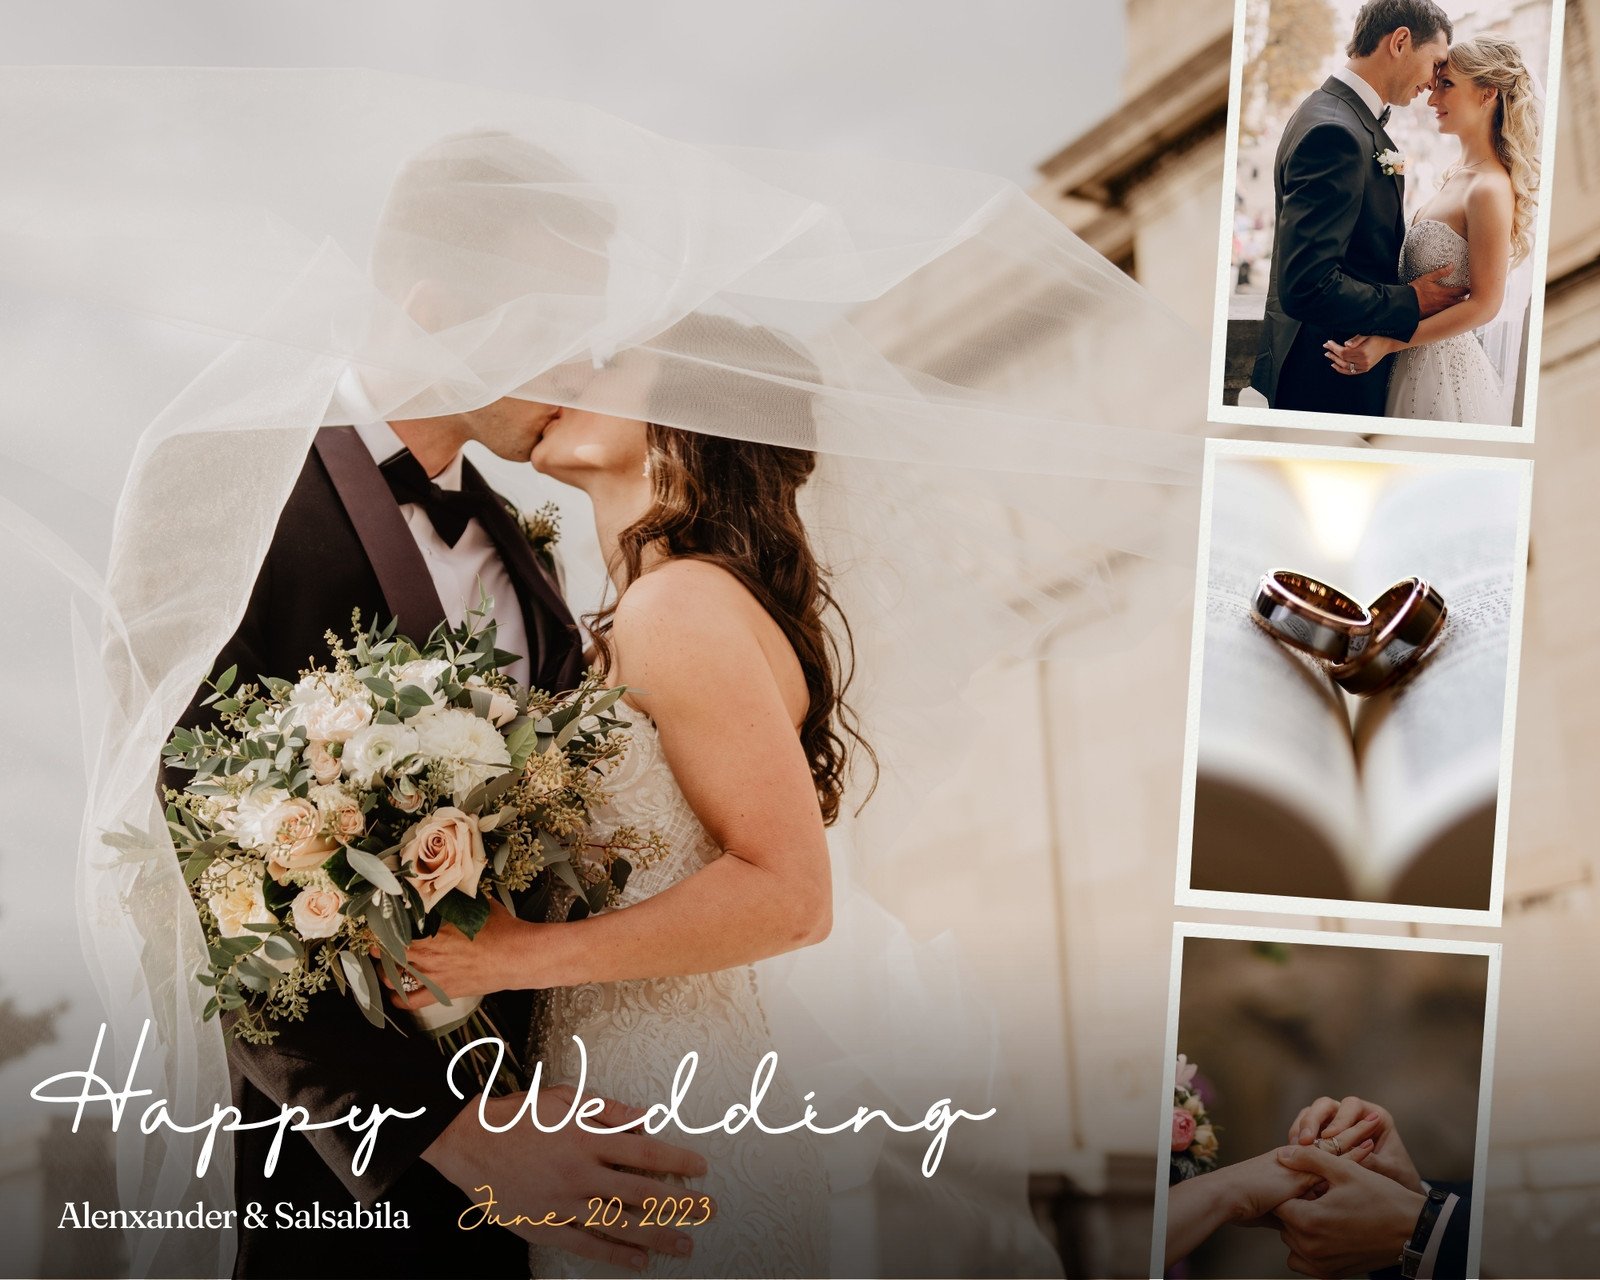 Wedding Photo Book Canva Editable Template Customizable Wedding or  Anniversary Photo Album Ebook Template 20 Pages 